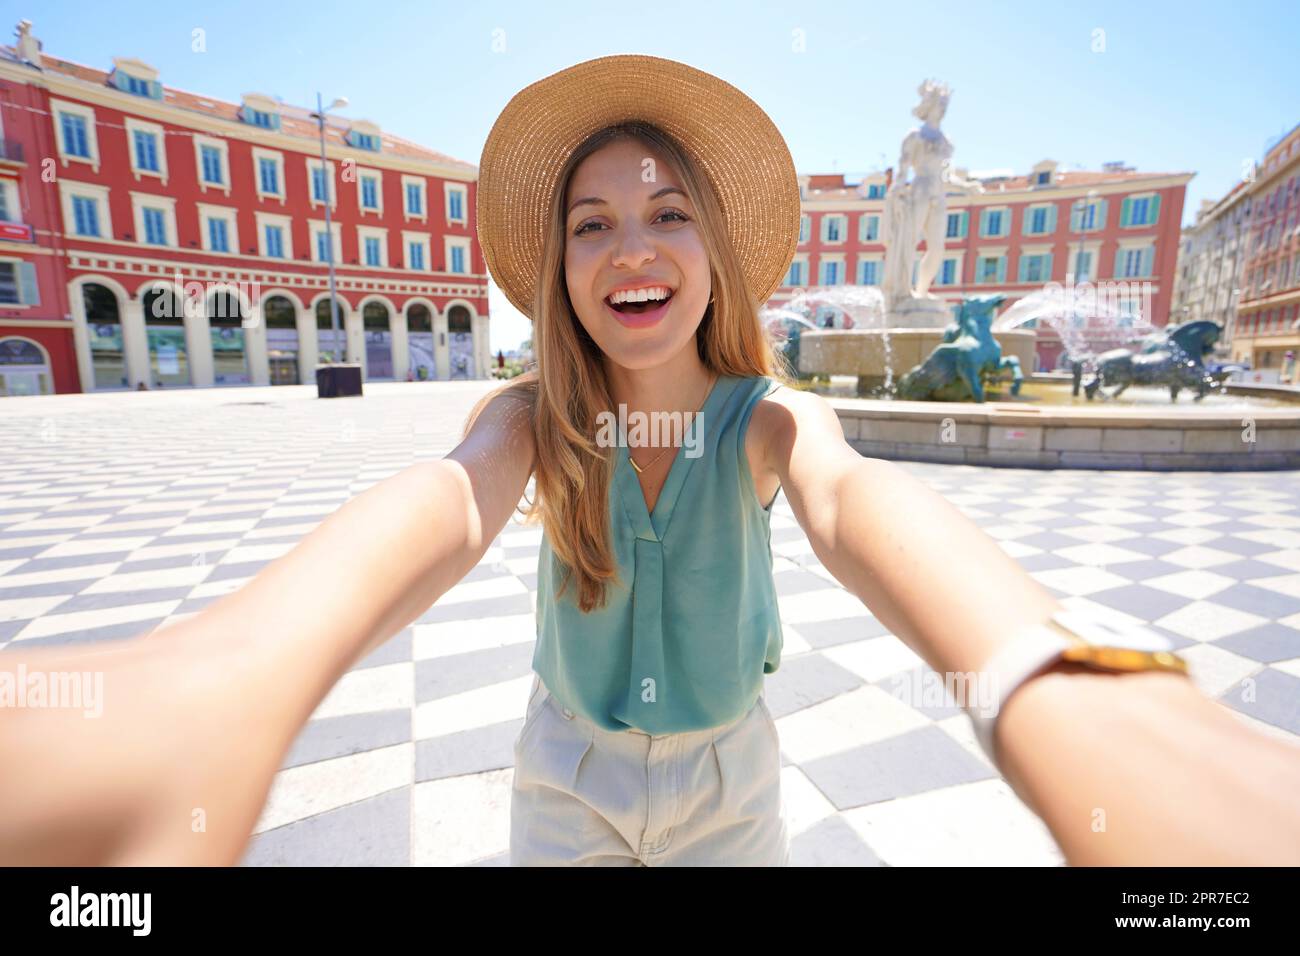 Self portrait of smiling cheerful traveler woman in Massena square, Nice, Cote d'Azur, France Stock Photo